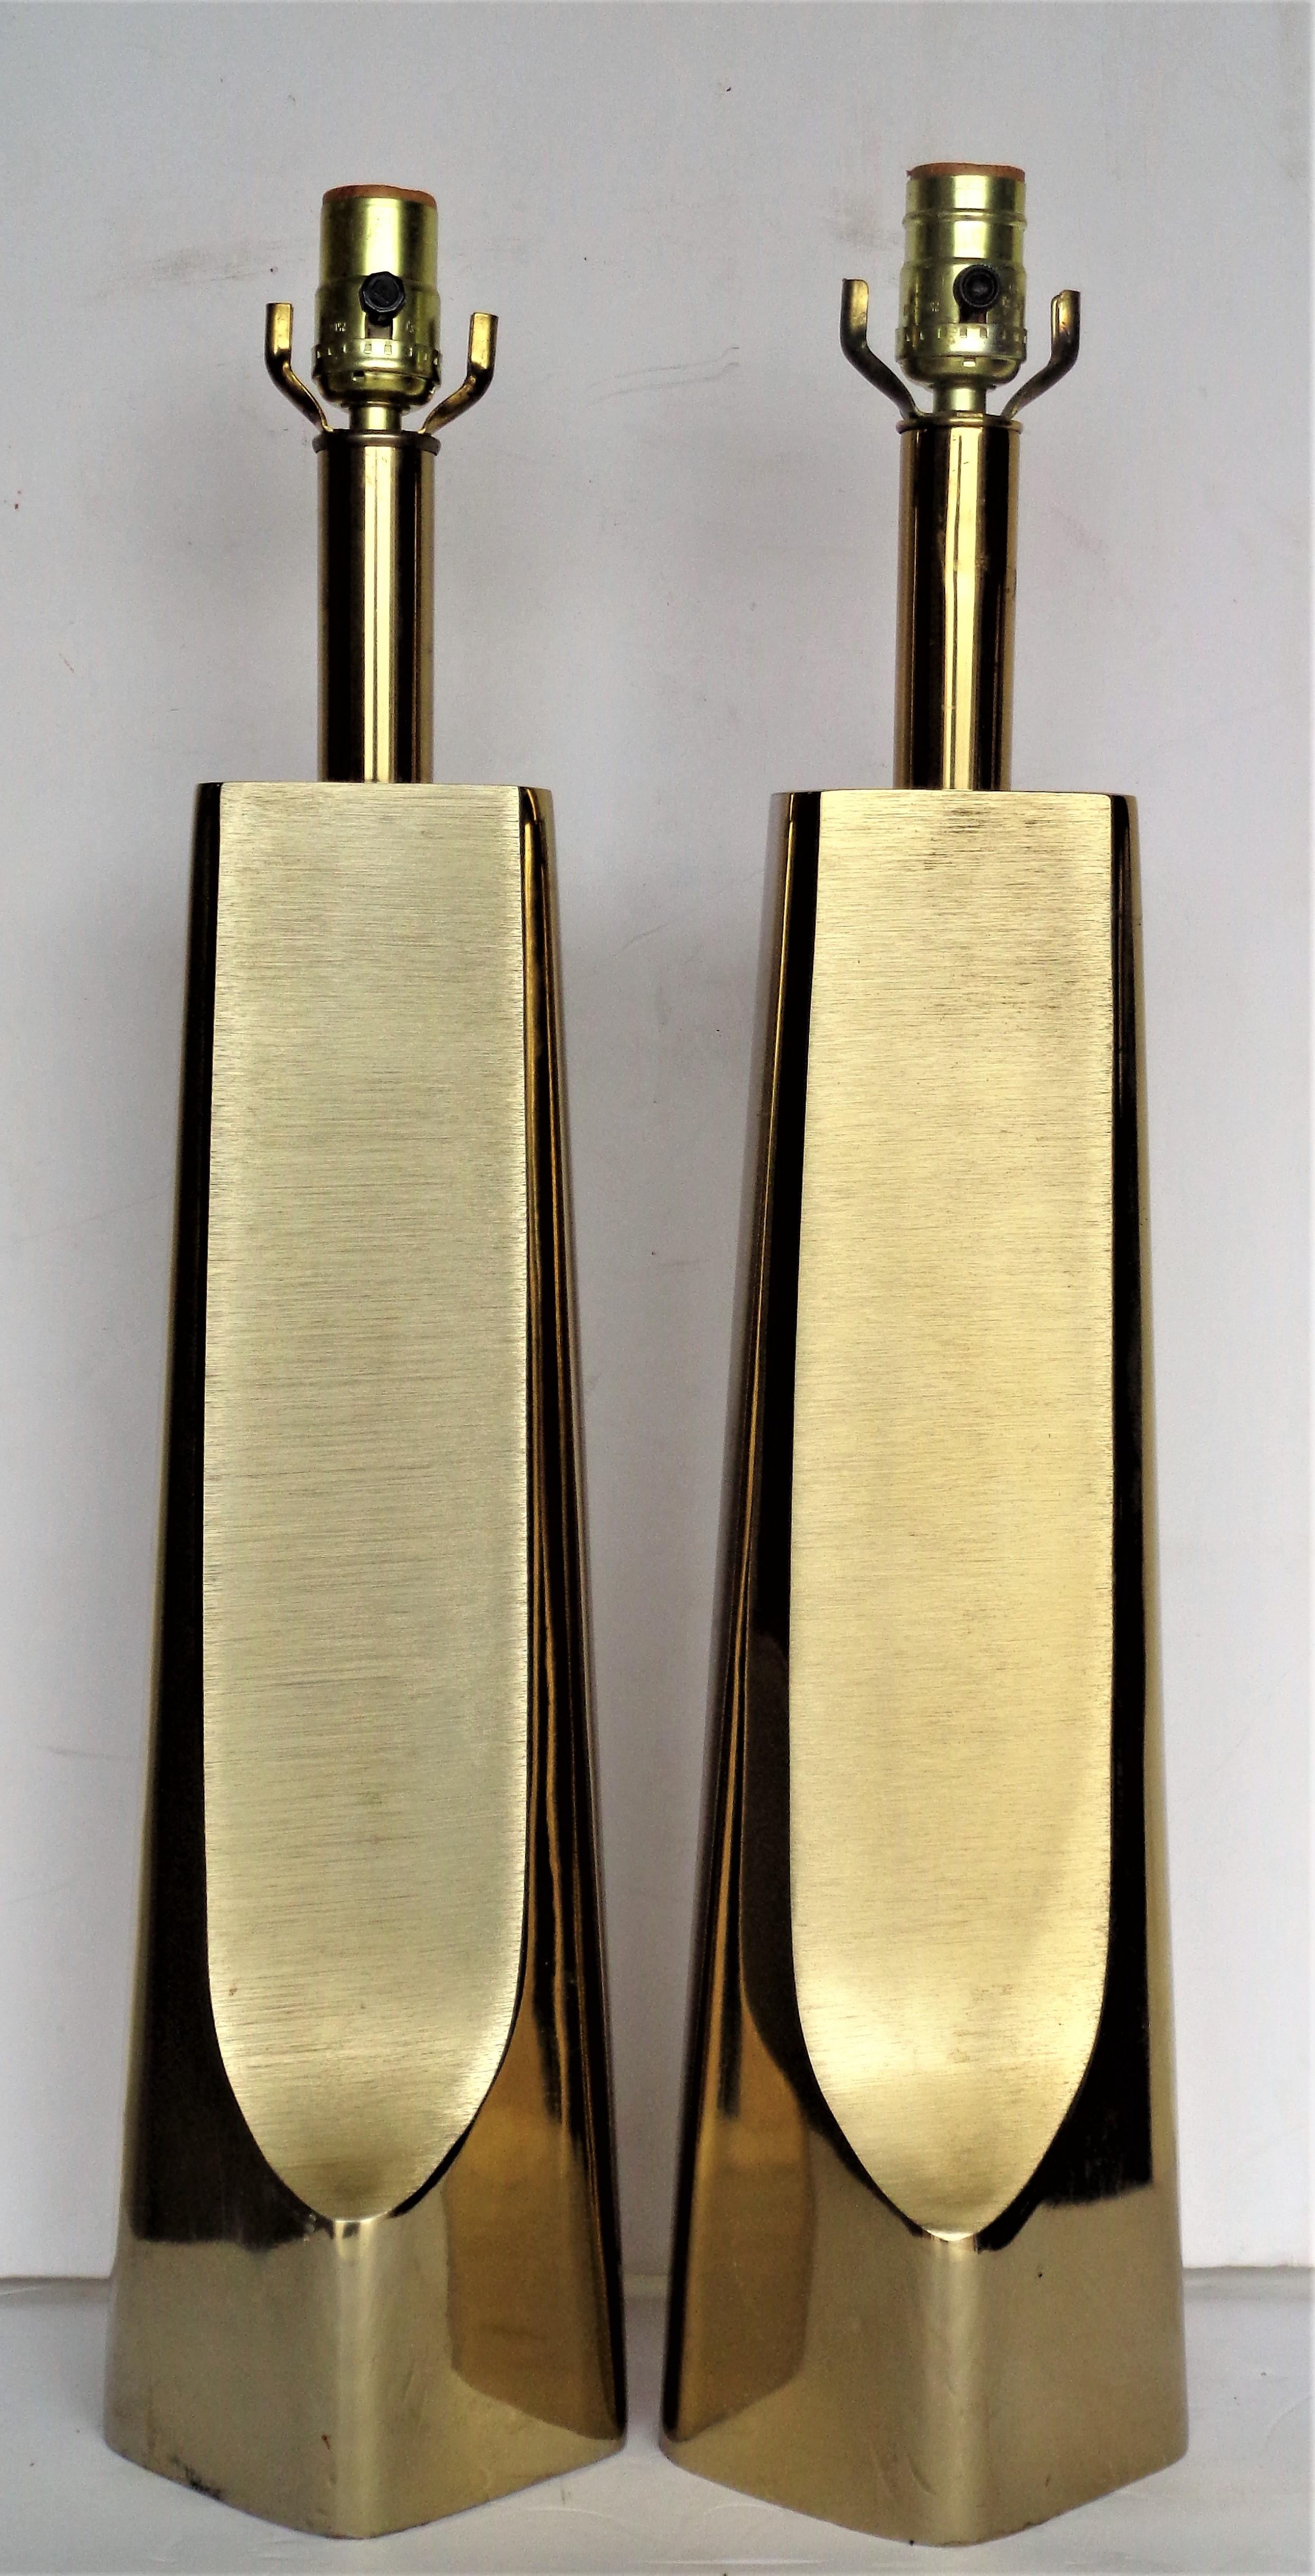 Pair of Modernist polished brass metal table lamps with brushed satin finish on concave front and back panels. Manufactured by Laurel Lamp Co. Newark, NJ ( see original paper labels on - sockets pictures 13,14 ) Beautifully designed great looking